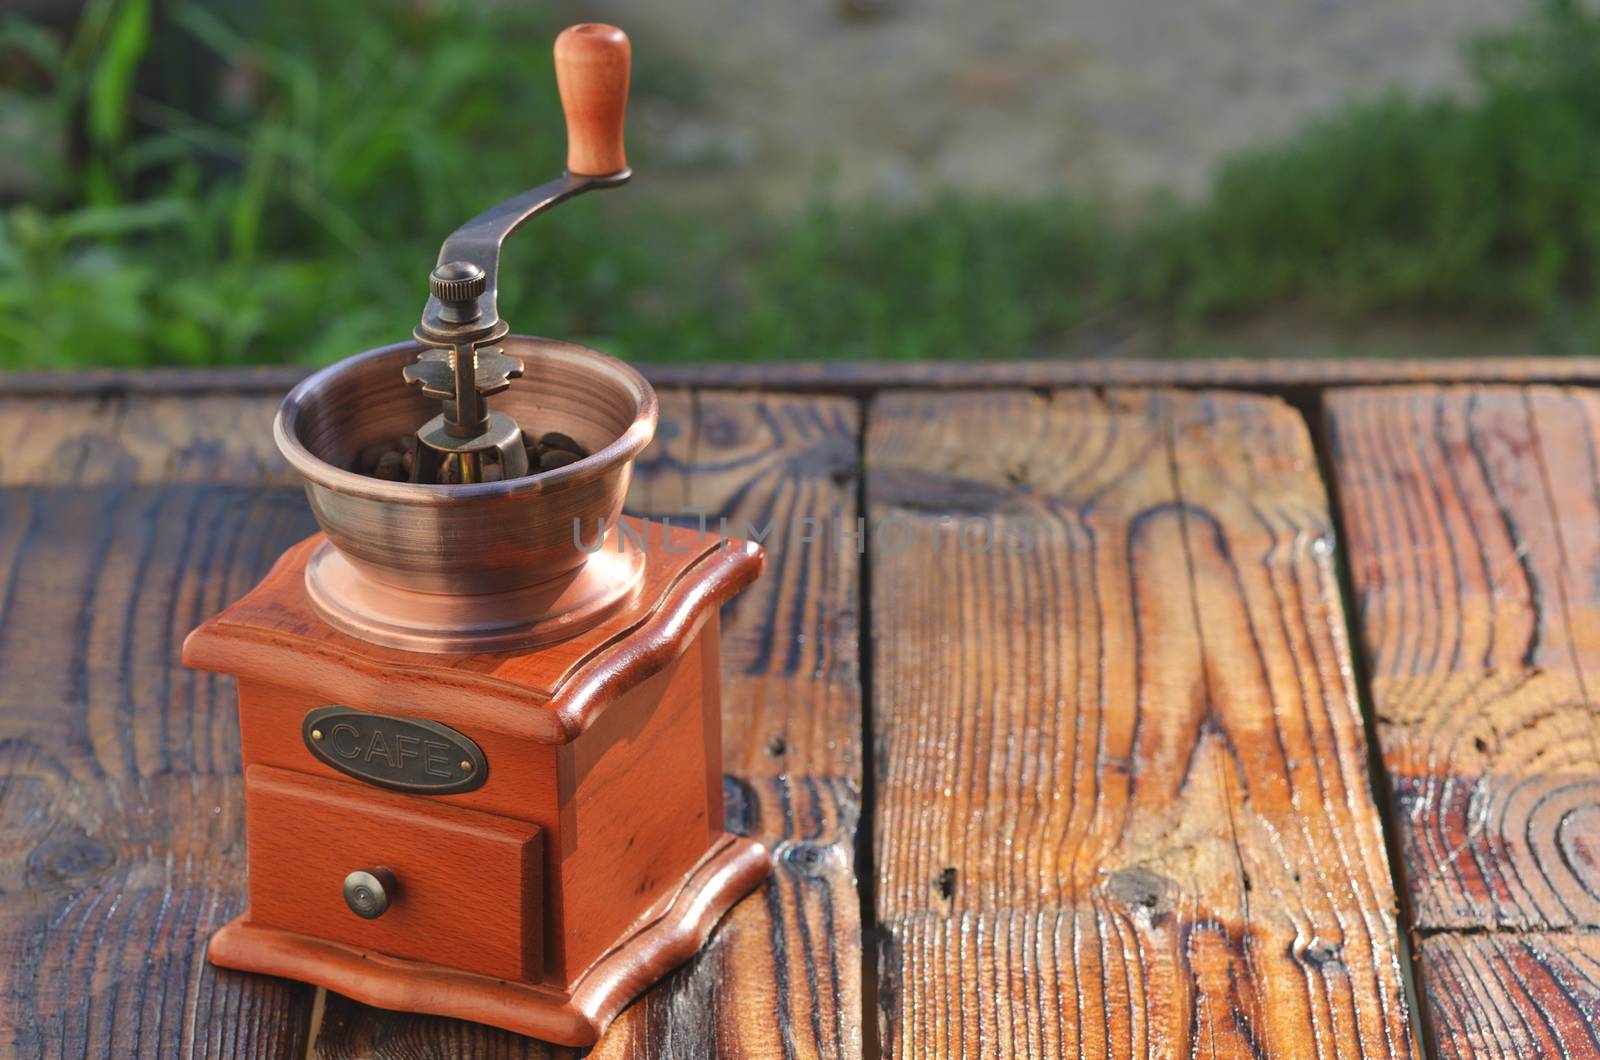 Manual horizontal coffee grinder with coffee beans on wooden boards against a background of green